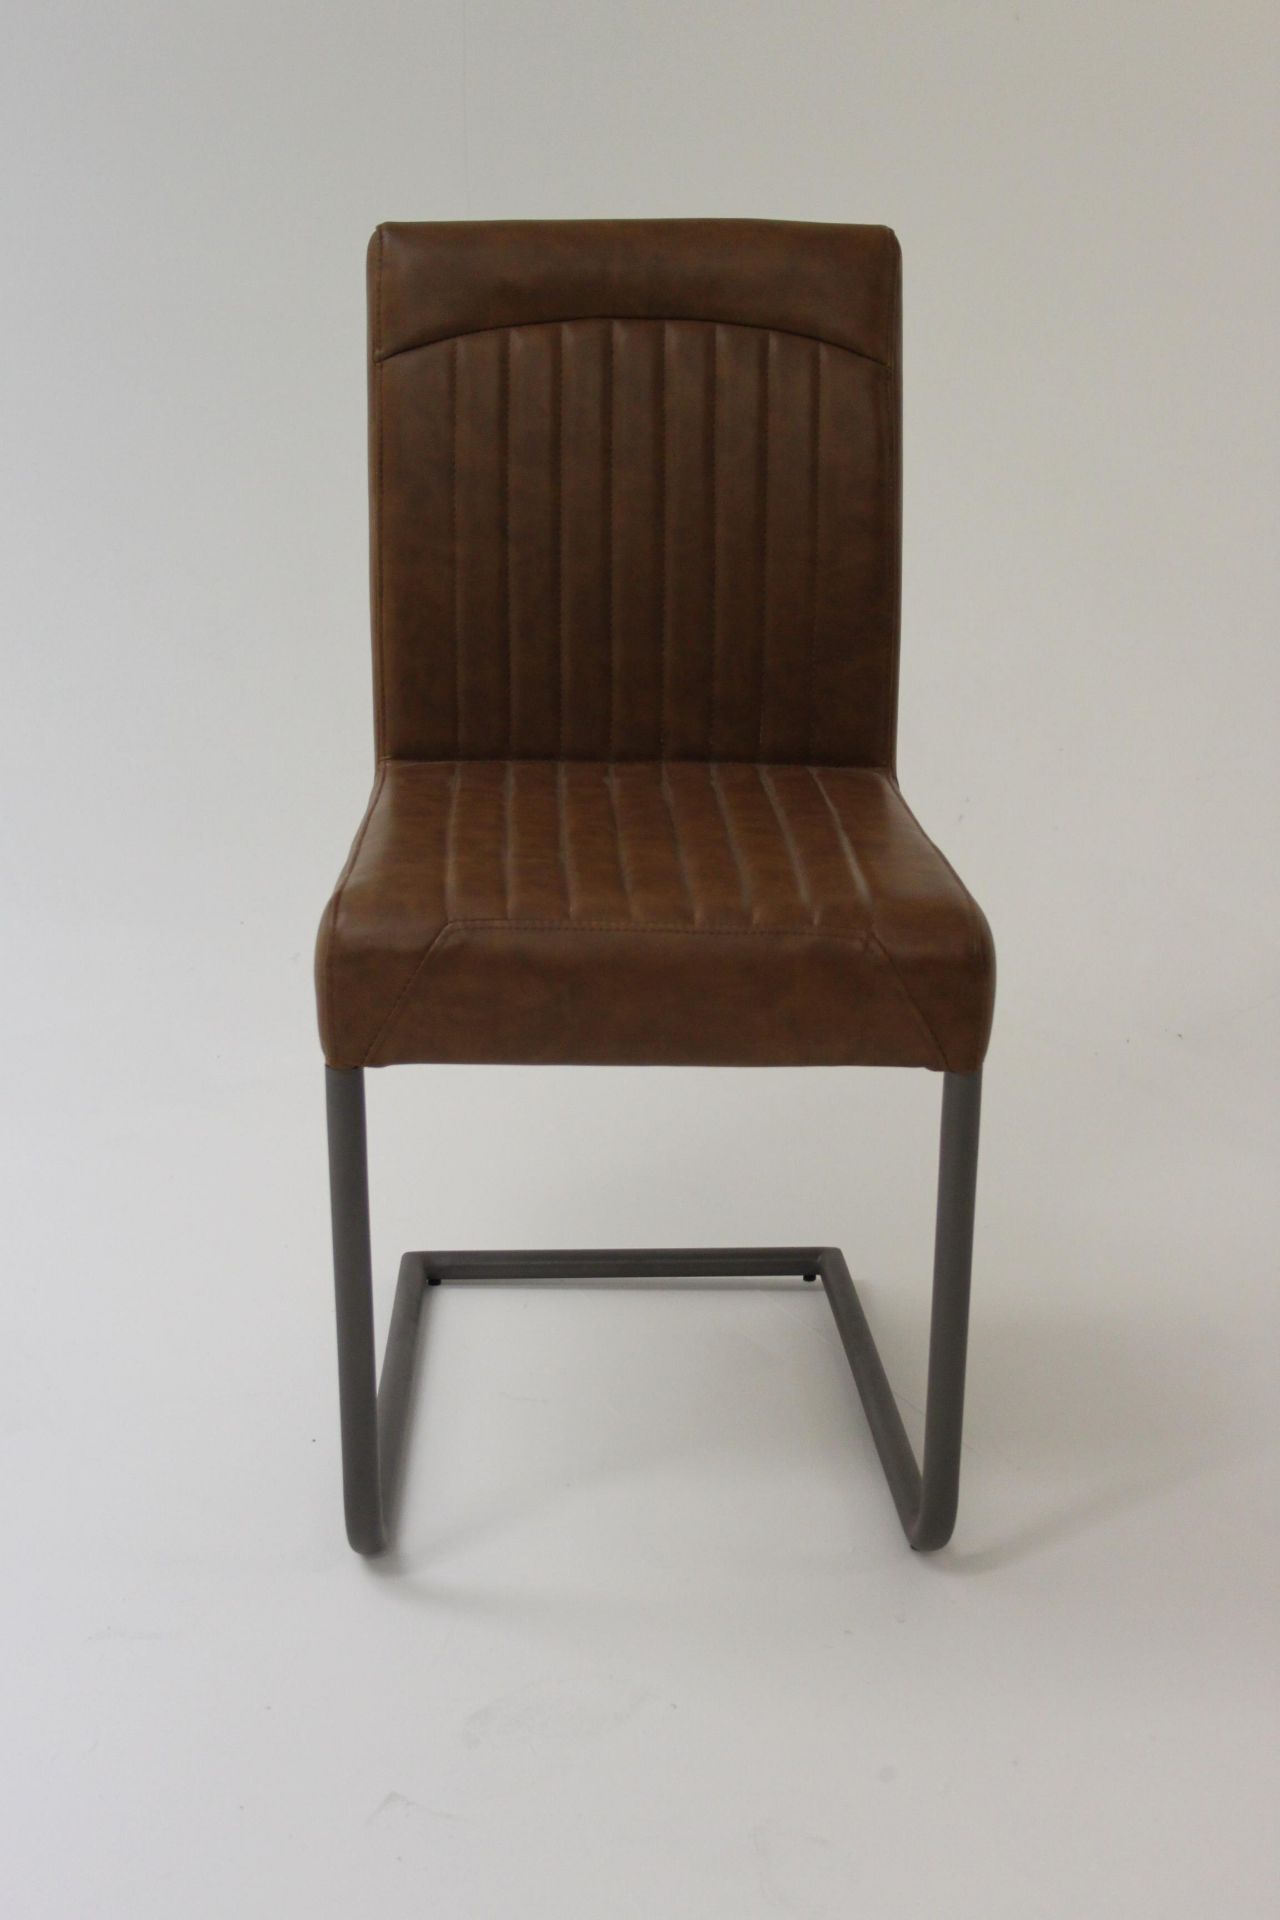 Capri Chair Tan Deep Padding With A Shapely Backrest Makes It Really Comfortable 43 5 X 57 X 91cm ( - Image 2 of 3